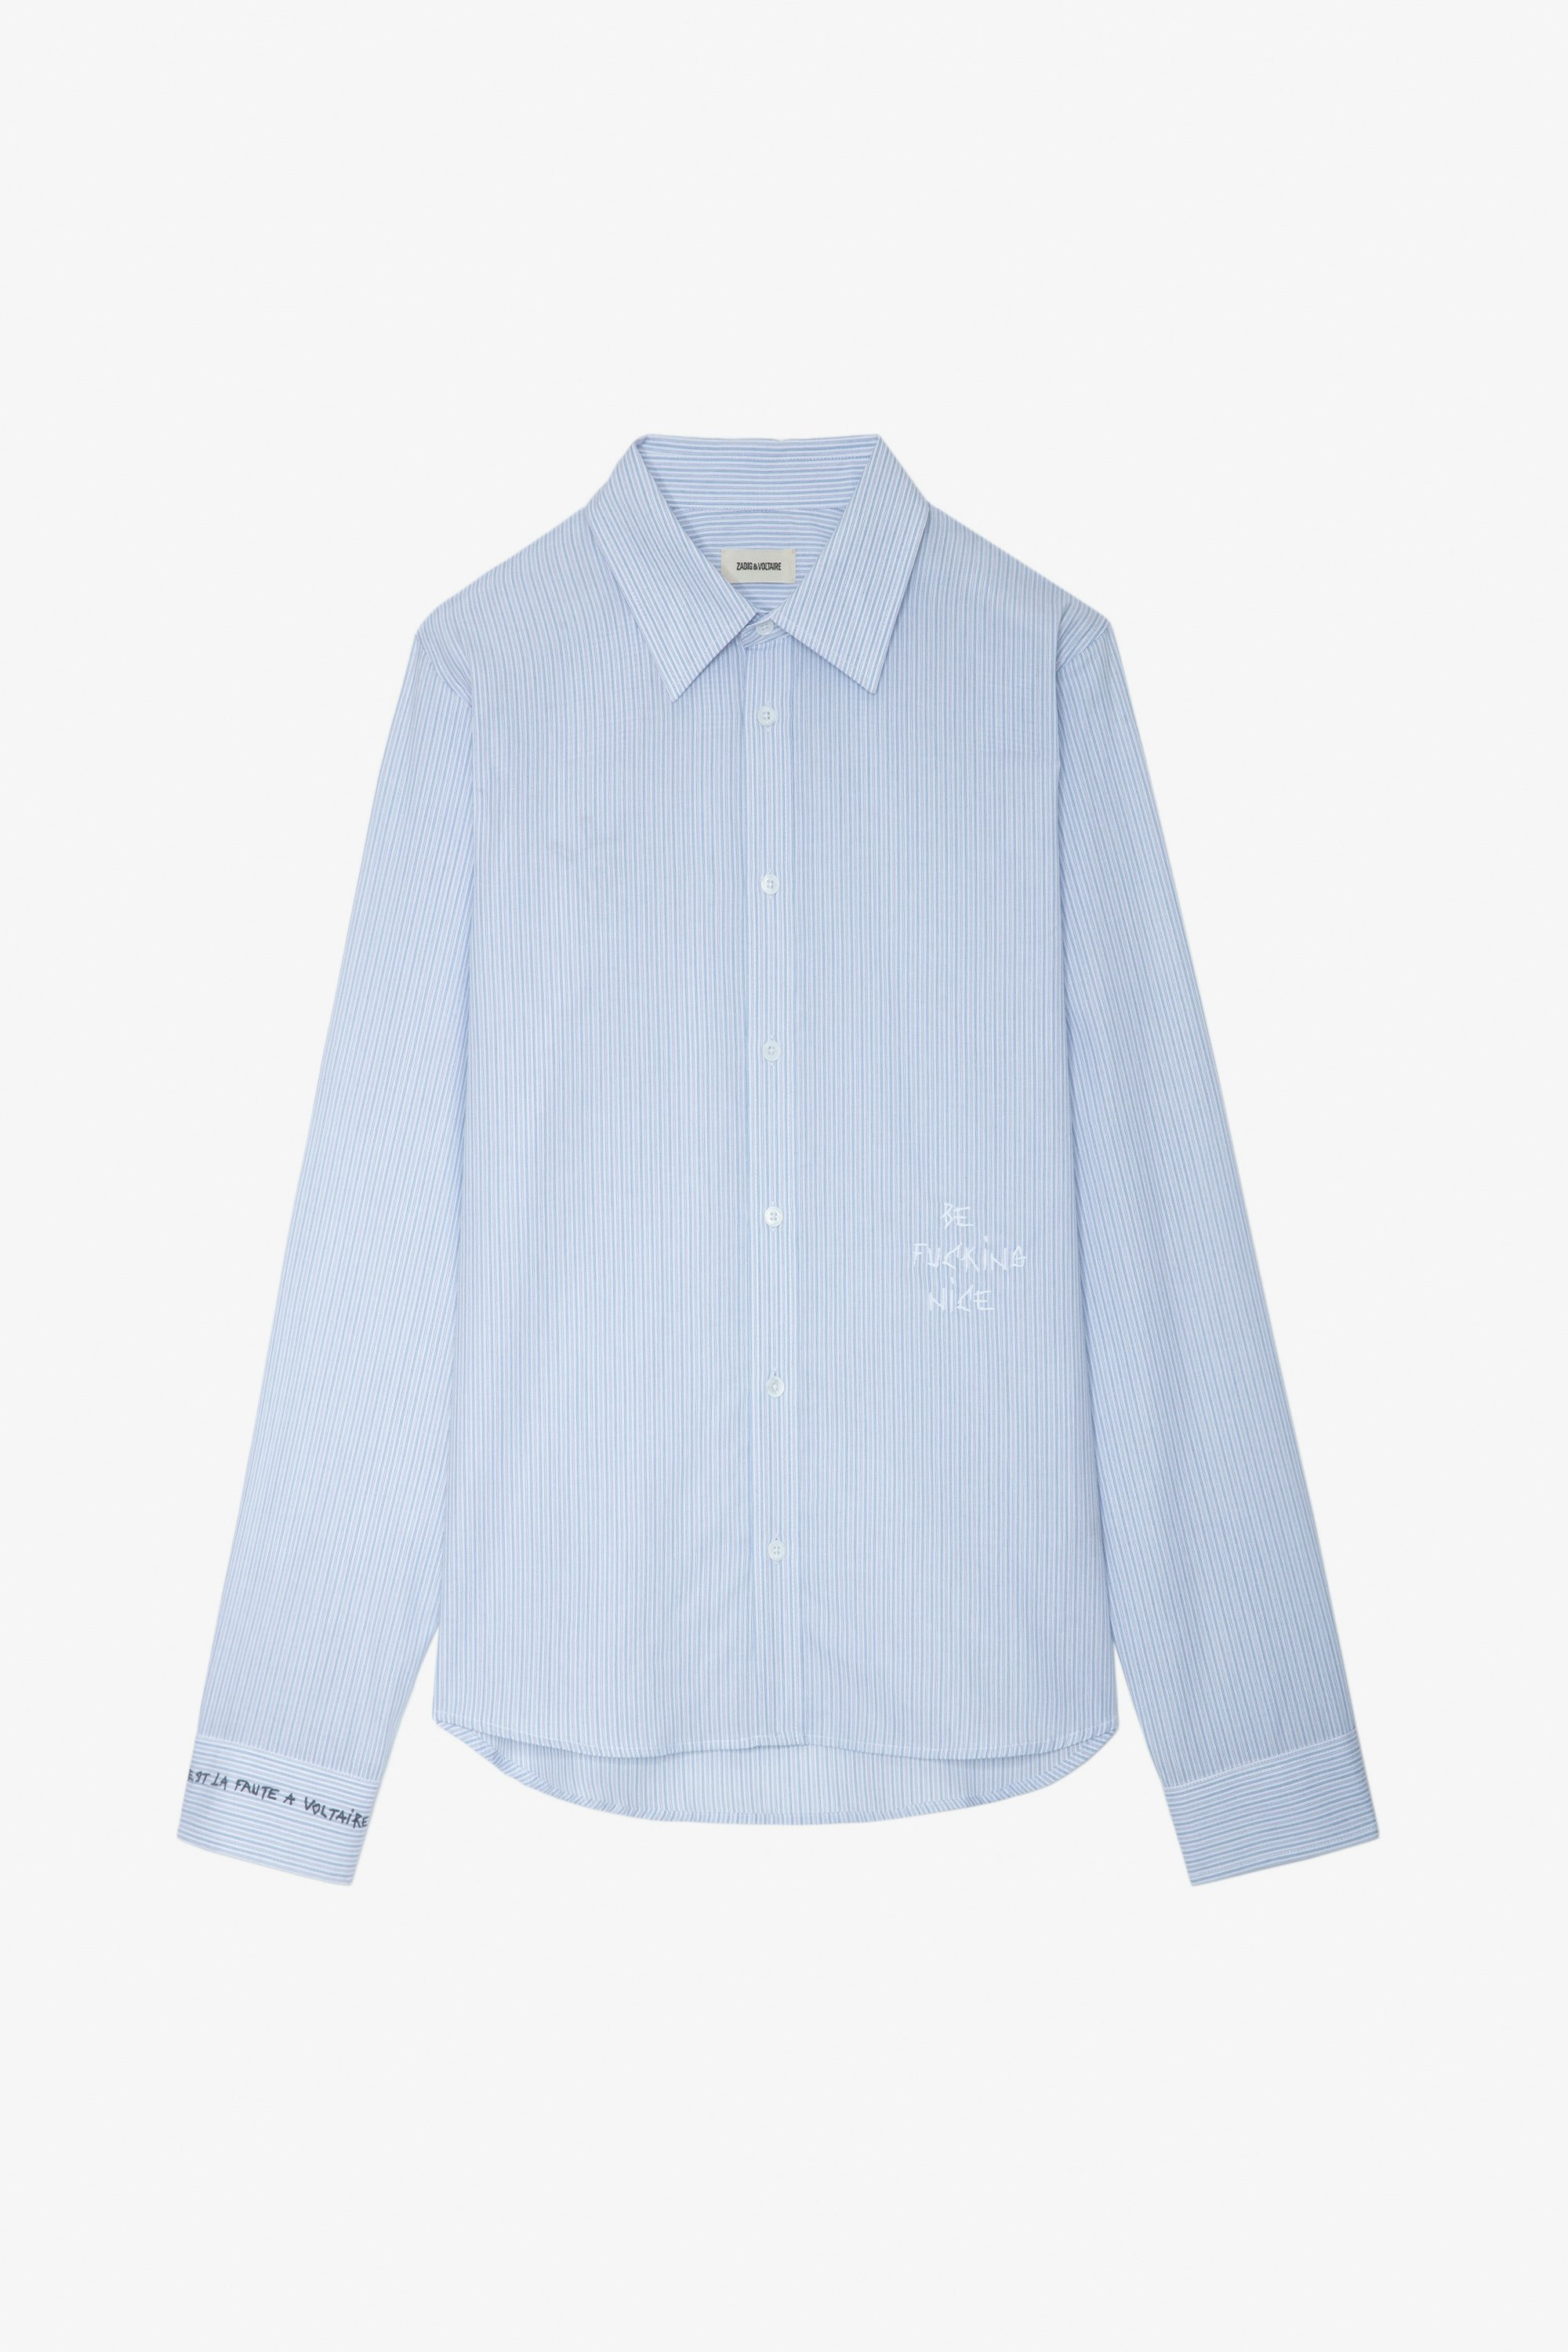 Stan Shirt - Men’s sky blue cotton striped shirt with embroidery.